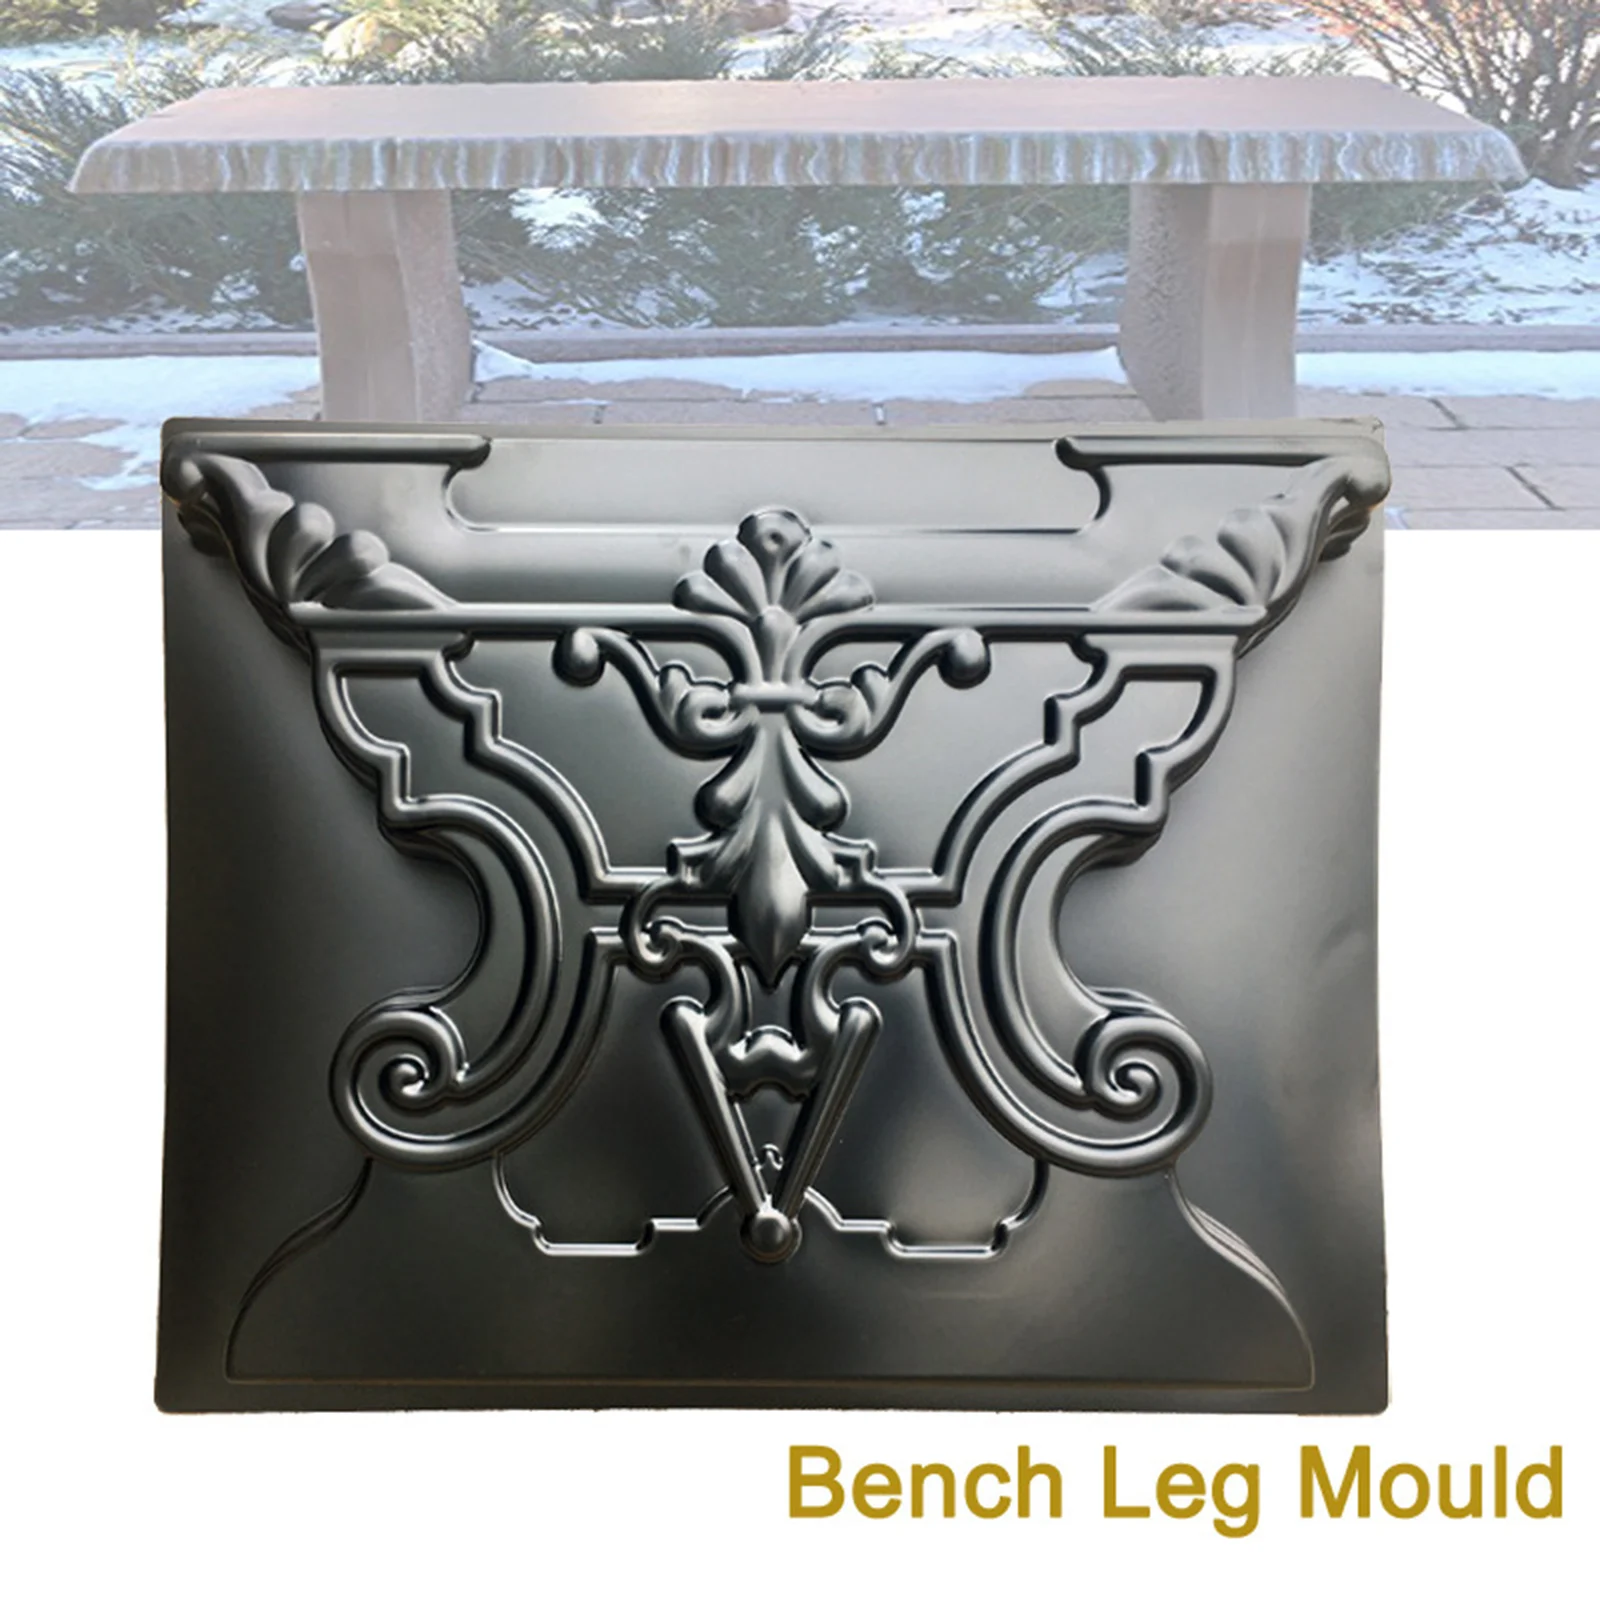 Simulation Bench Leg Mold Path Maker Mold DIY for Outdoor Lawn Decoration